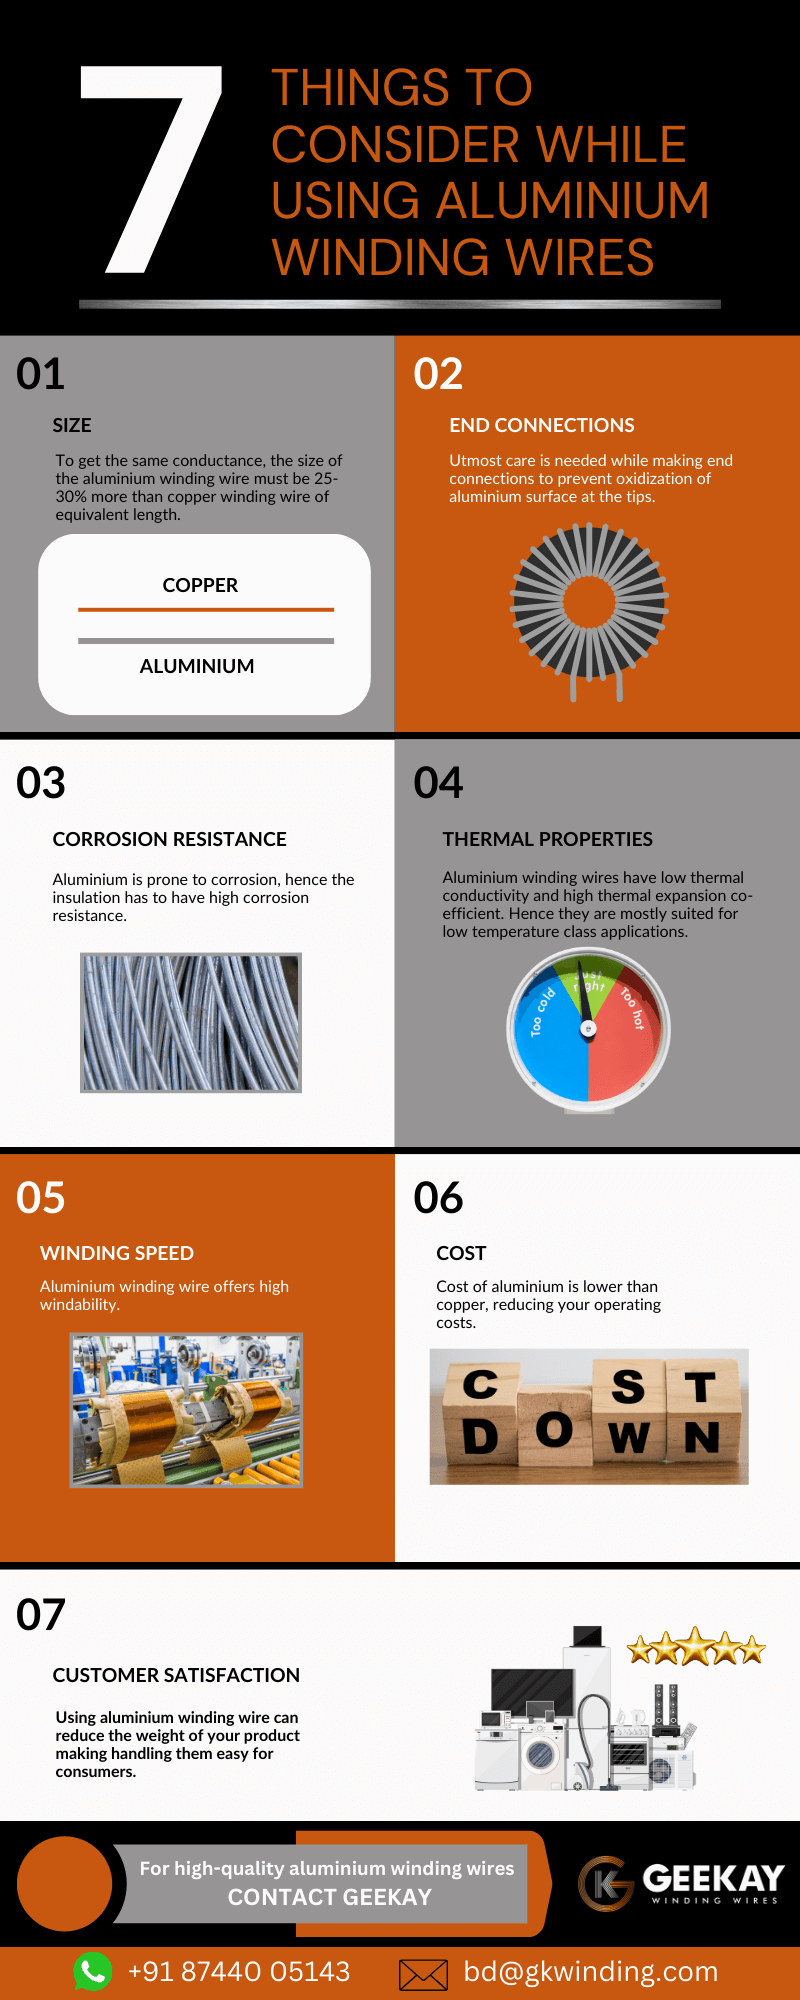 Aluminium Winding Wire - 7 Things to consider while using them in your applications